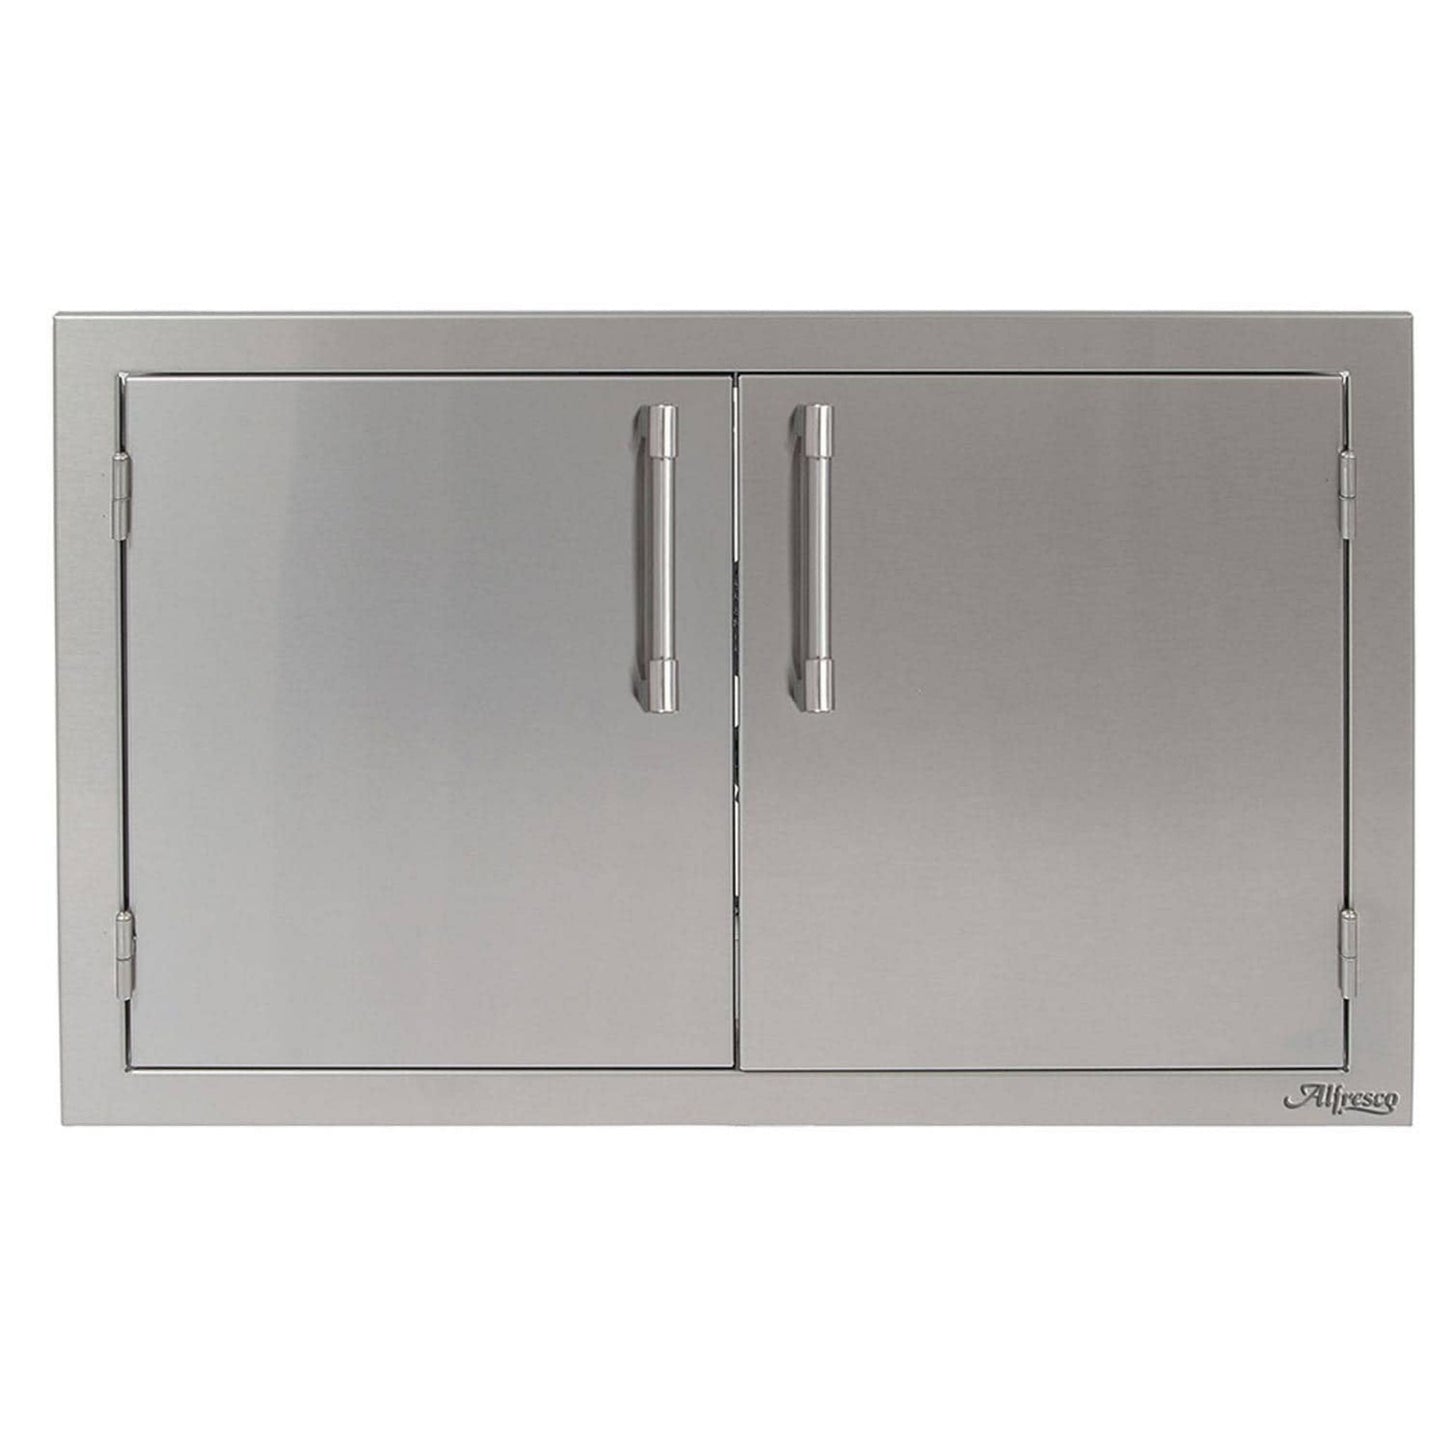 Alfresco 42" Blue Lilac Gloss Stainless Steel Double Access Doors